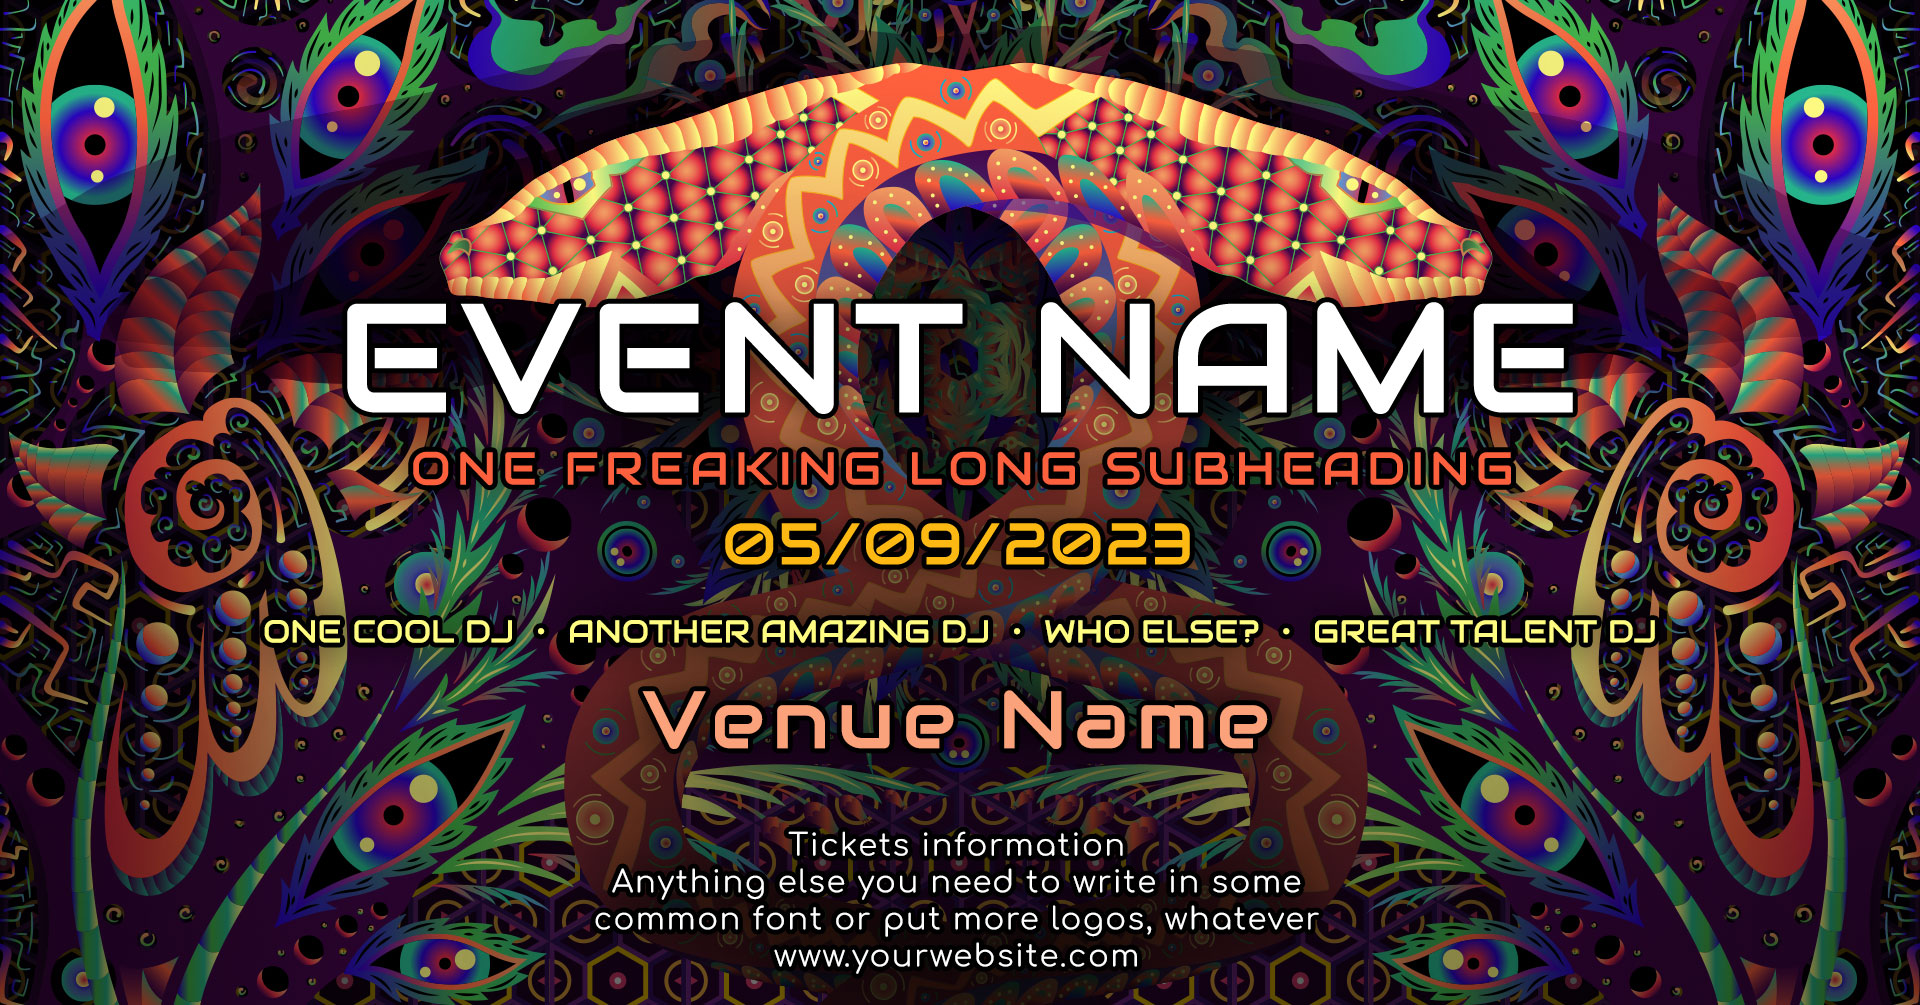 Jungle Snakes Psychedelic Trance Party Promotion - Facebook Cover Template